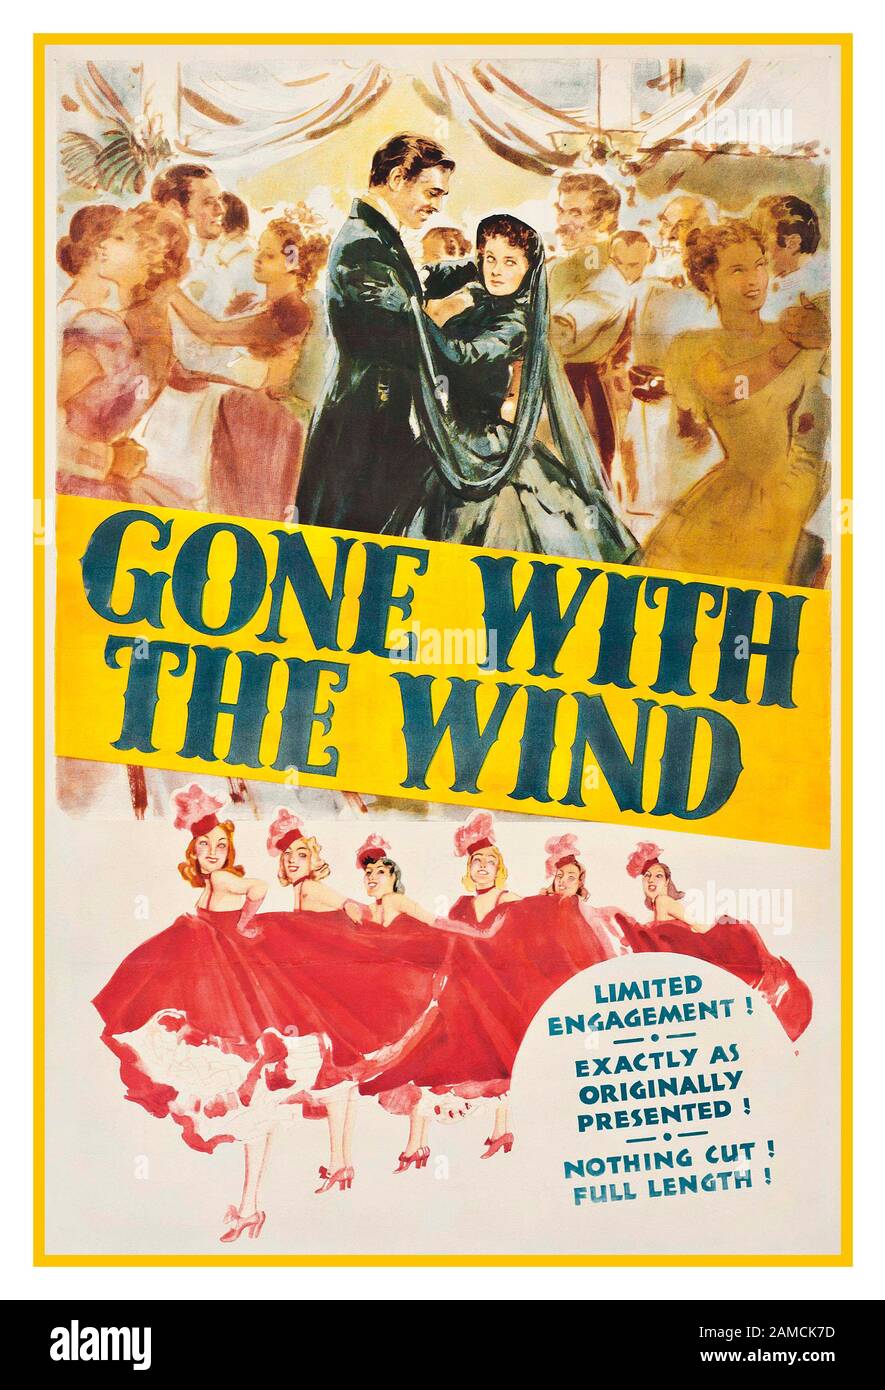 GONE WITH THE WIND 1930’s Vintage Movie Film Poster  1939, M.G.M., USA by artist Armando Seguso  Gone with the Wind is a 1939 American epic historical romance film adapted from the 1936 novel by Margaret Mitchell. The film was produced by David O. Selznick of Selznick International Pictures and directed by Victor Fleming. The leading roles are played by Vivien Leigh (Scarlett), Clark Gable (Rhett), Leslie Howard (Ashley), and Olivia de Havilland (Melanie). Stock Photo